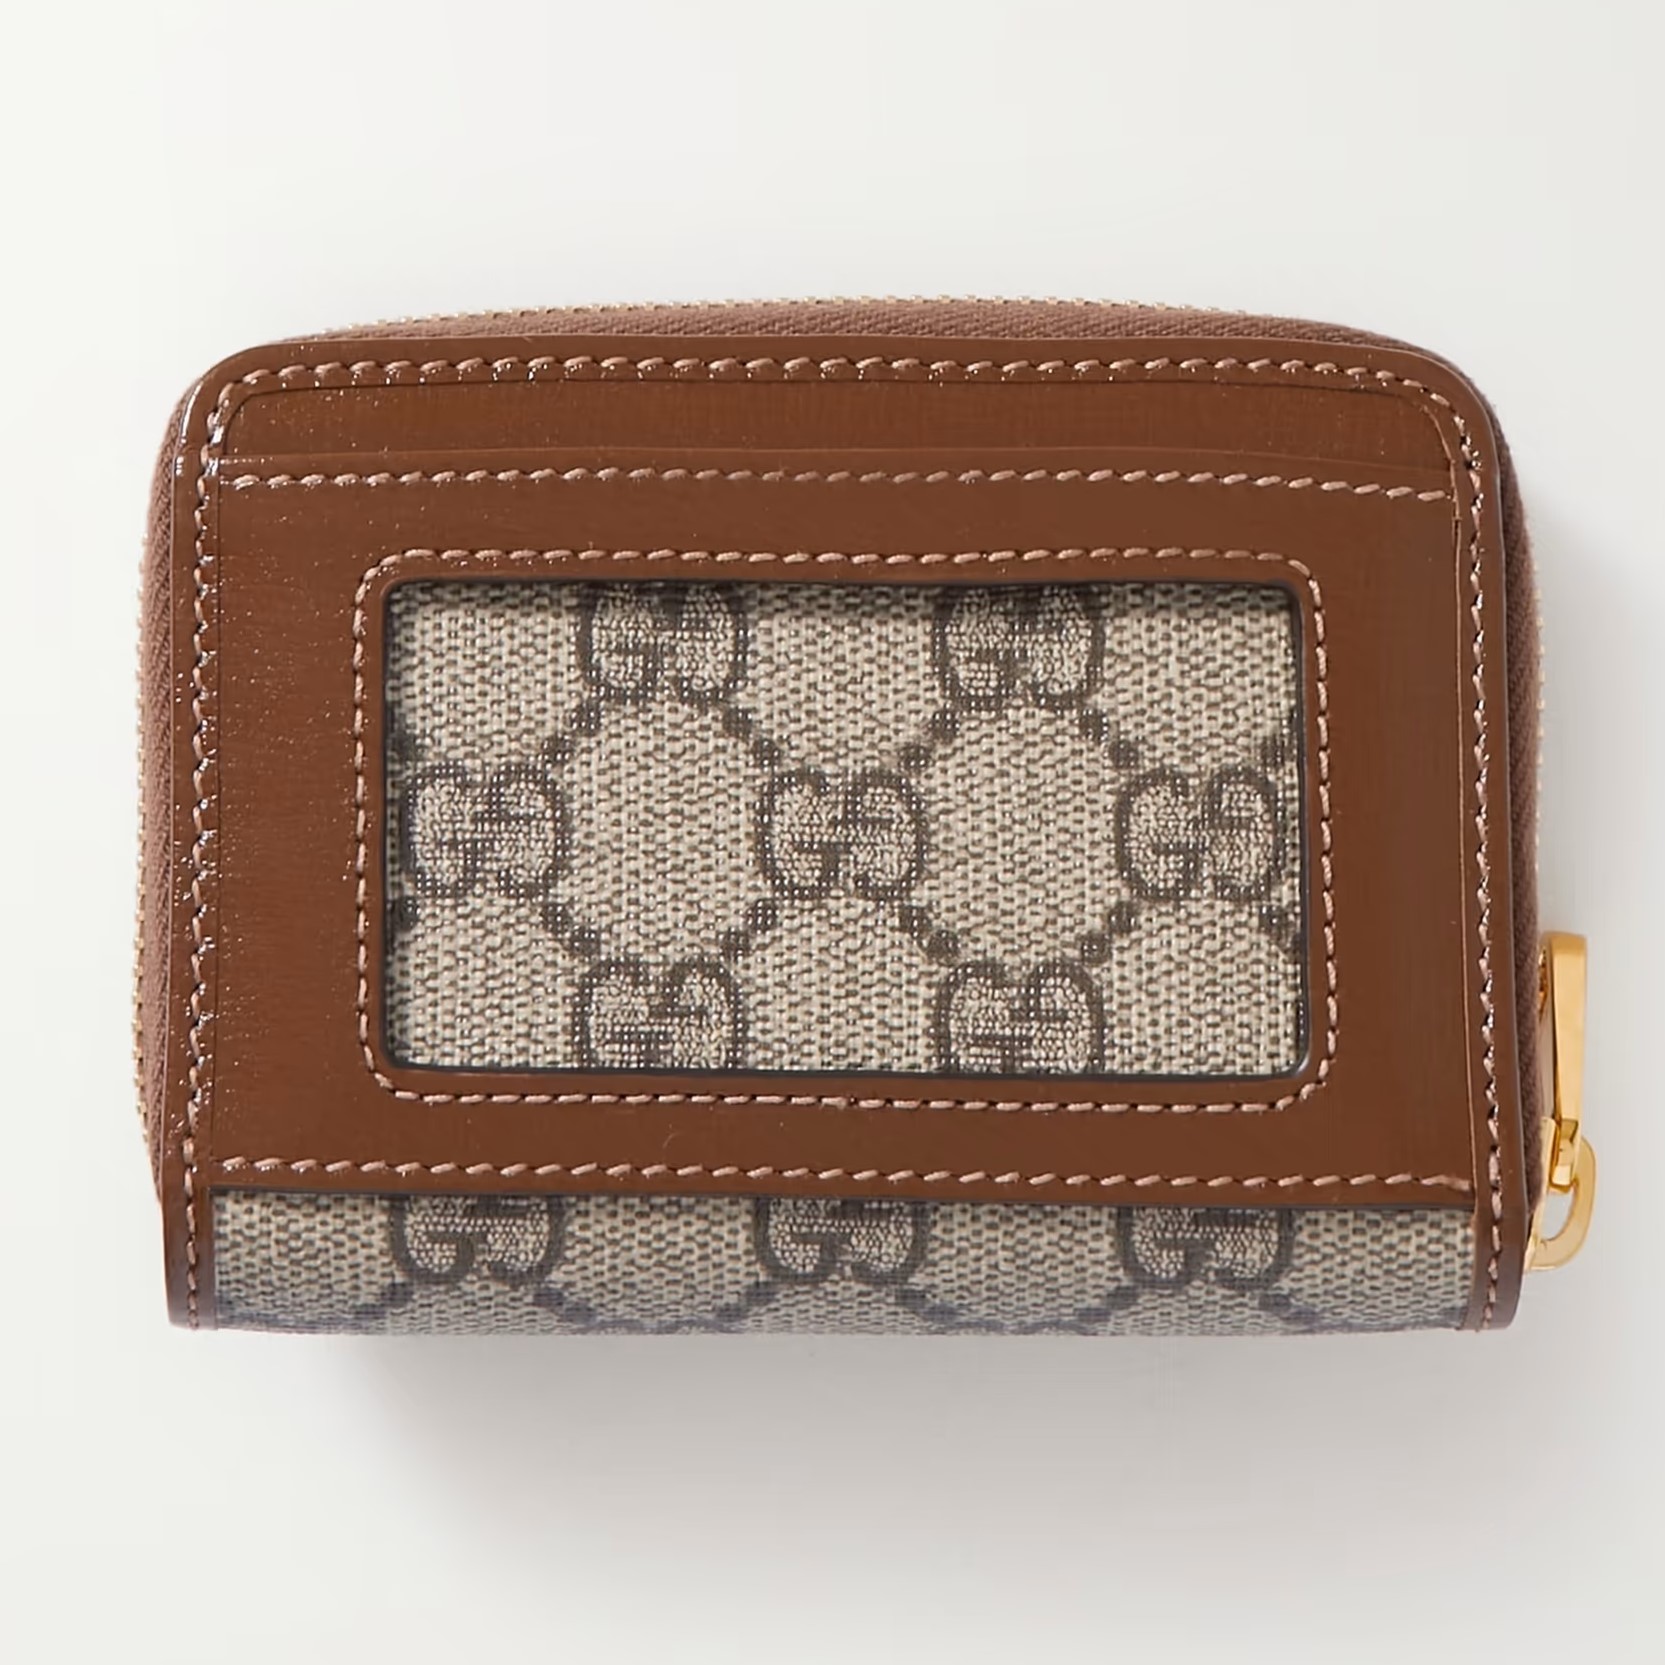 VÍ NGẮN NỮ CẦM TAY GUCCI HORSEBIT 1955 SMALL BROWN LEATHER TRIMMED PRINTED COATED CANVAS CARDHOLDER 5